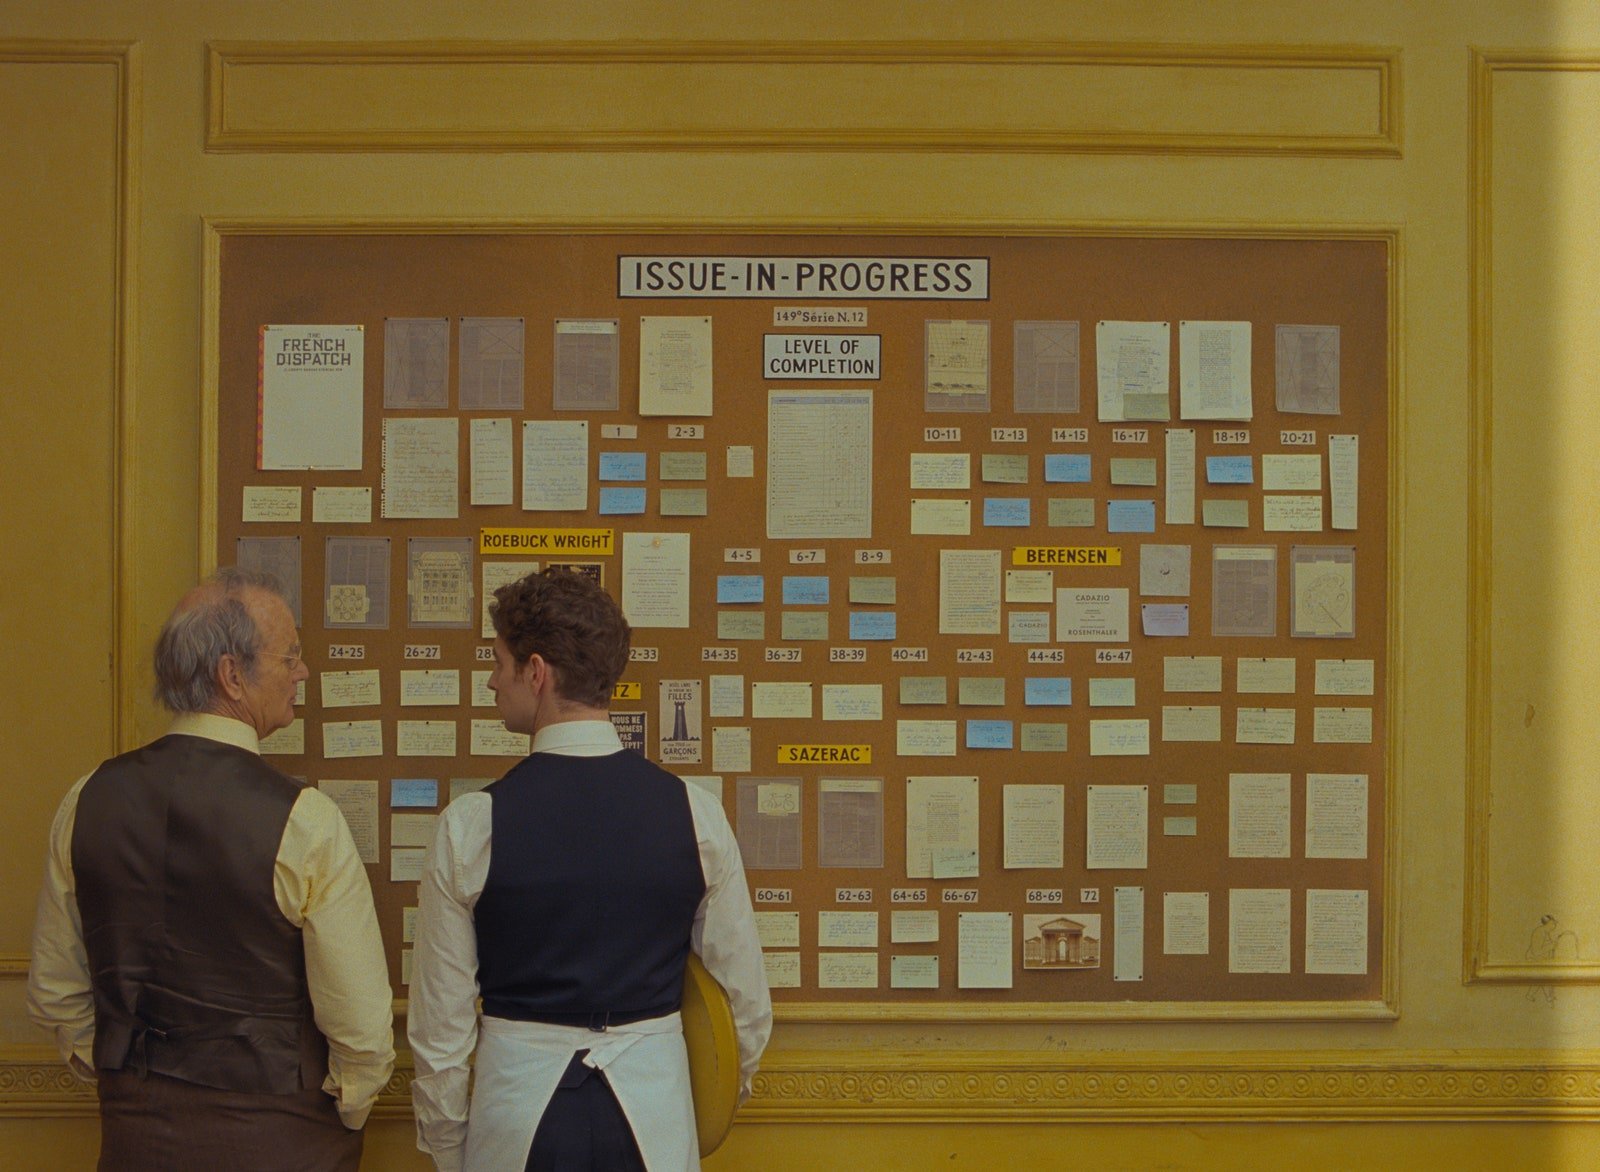 wes anderson, colour palette,   fan art, The Royal Tenenbaums,  accidently wes anderson, locations, wedding inspiration,  wedding invite inspiration,   film stills, films,  